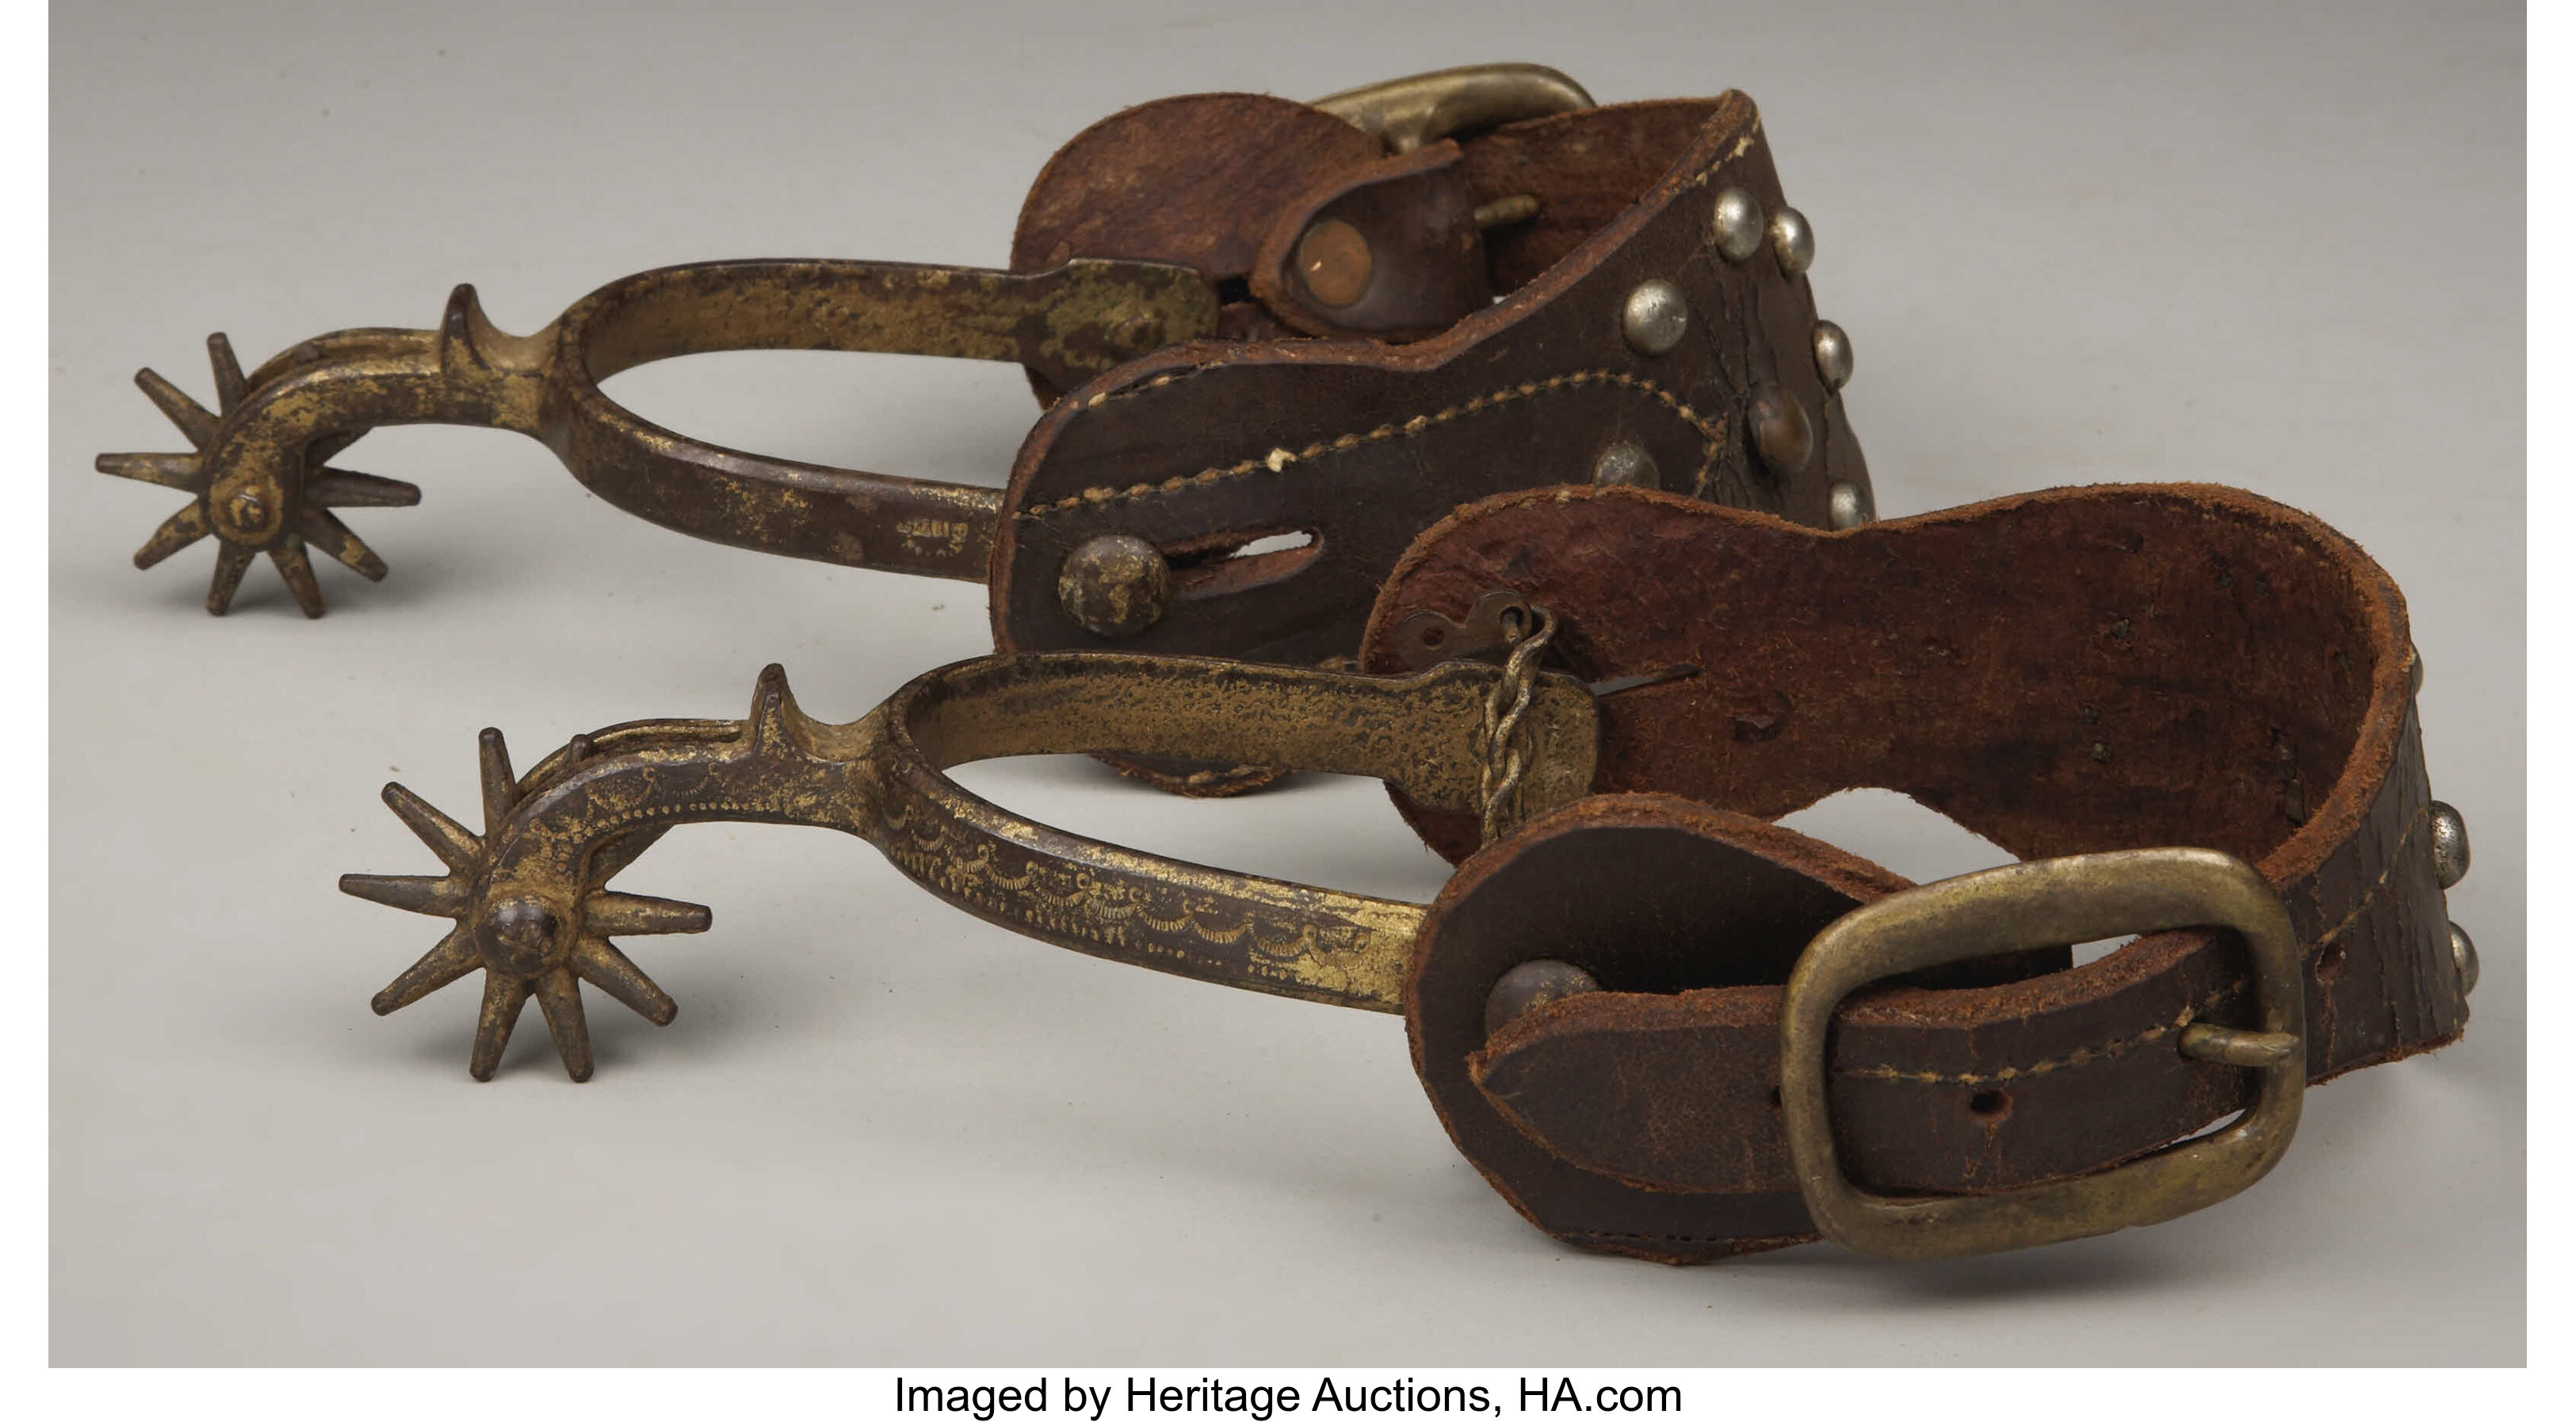 How Much Are Old Antique Cowboy Spurs Worth?